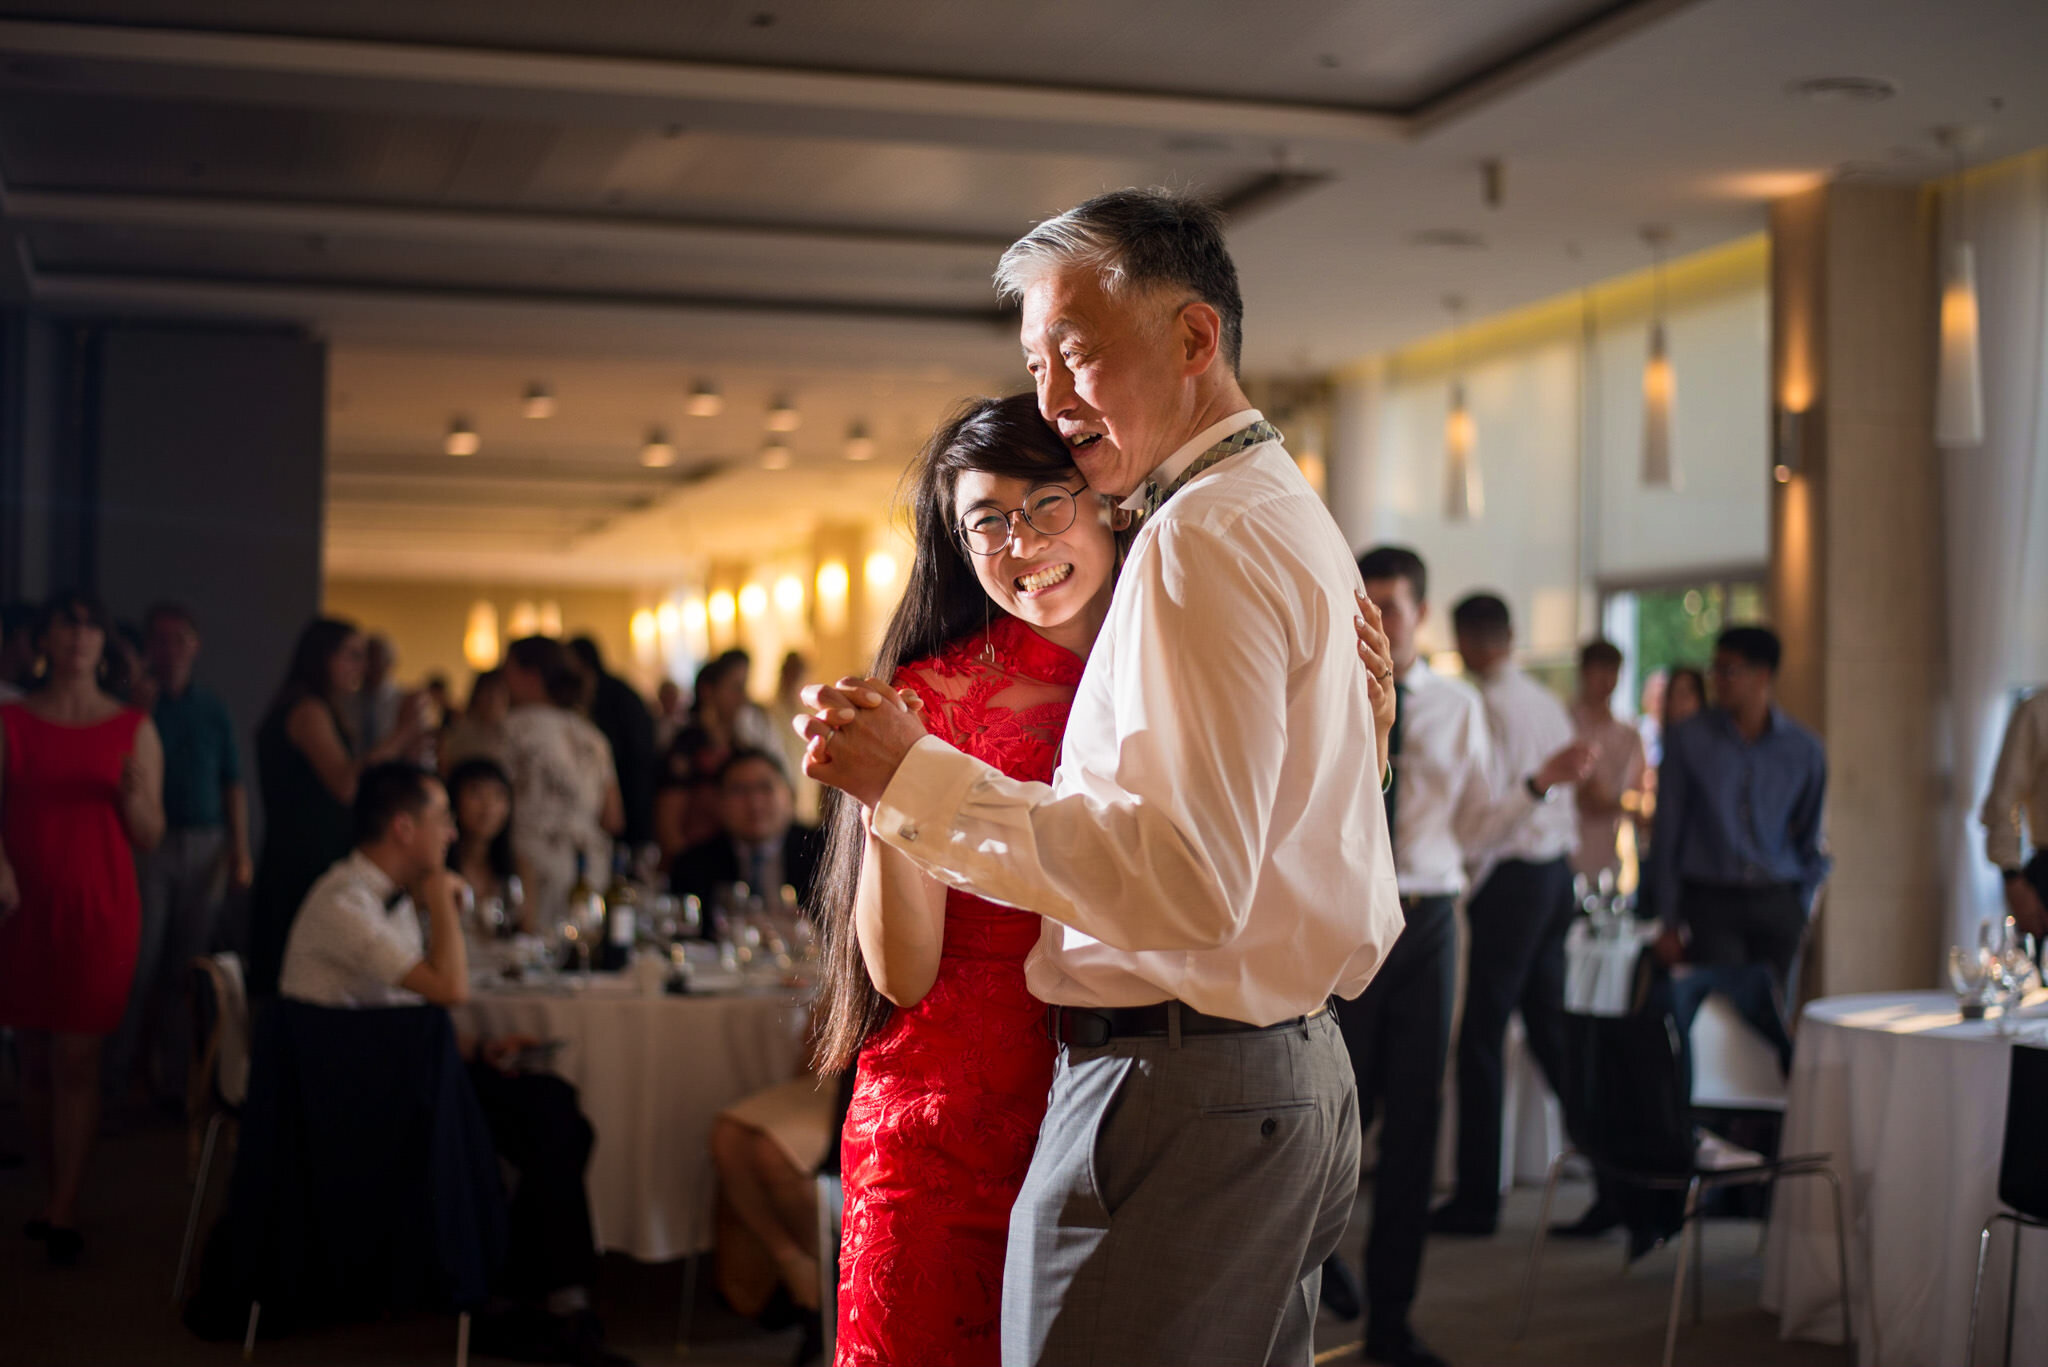 Father daughter dance at Vancouver B.C. wedding in July